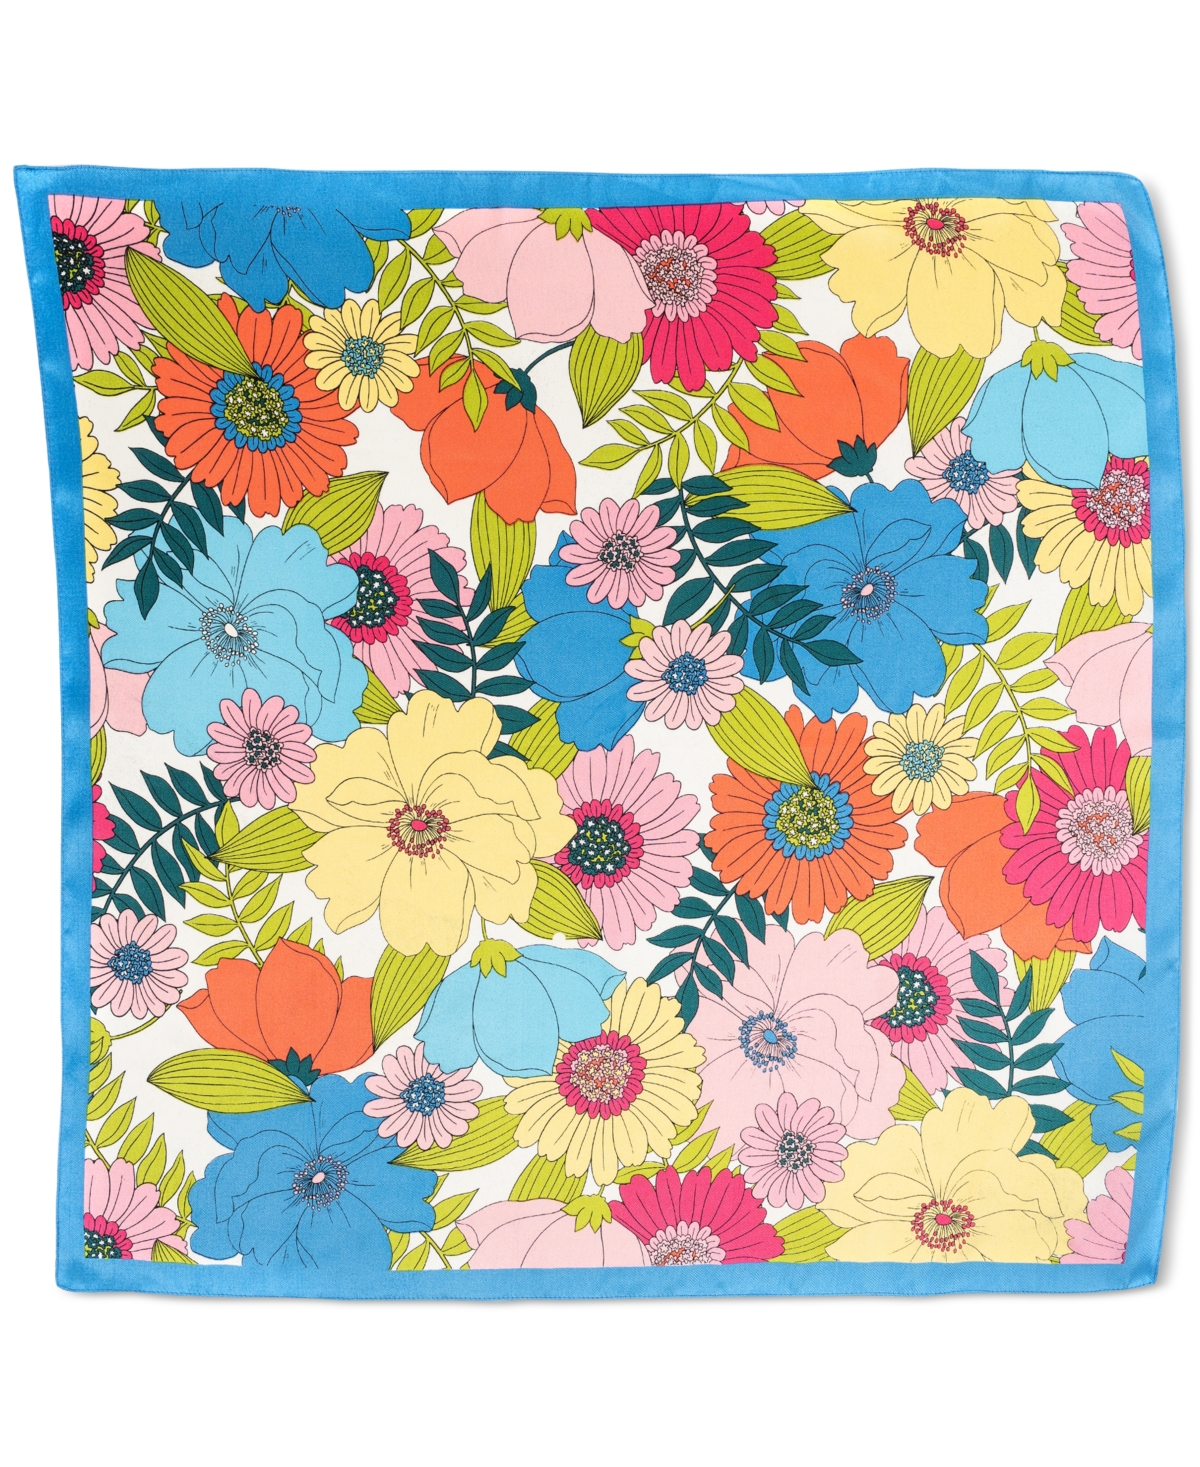 Women's Spring Has Sprung Floral Square Scarf, Created for Macy's - Multi